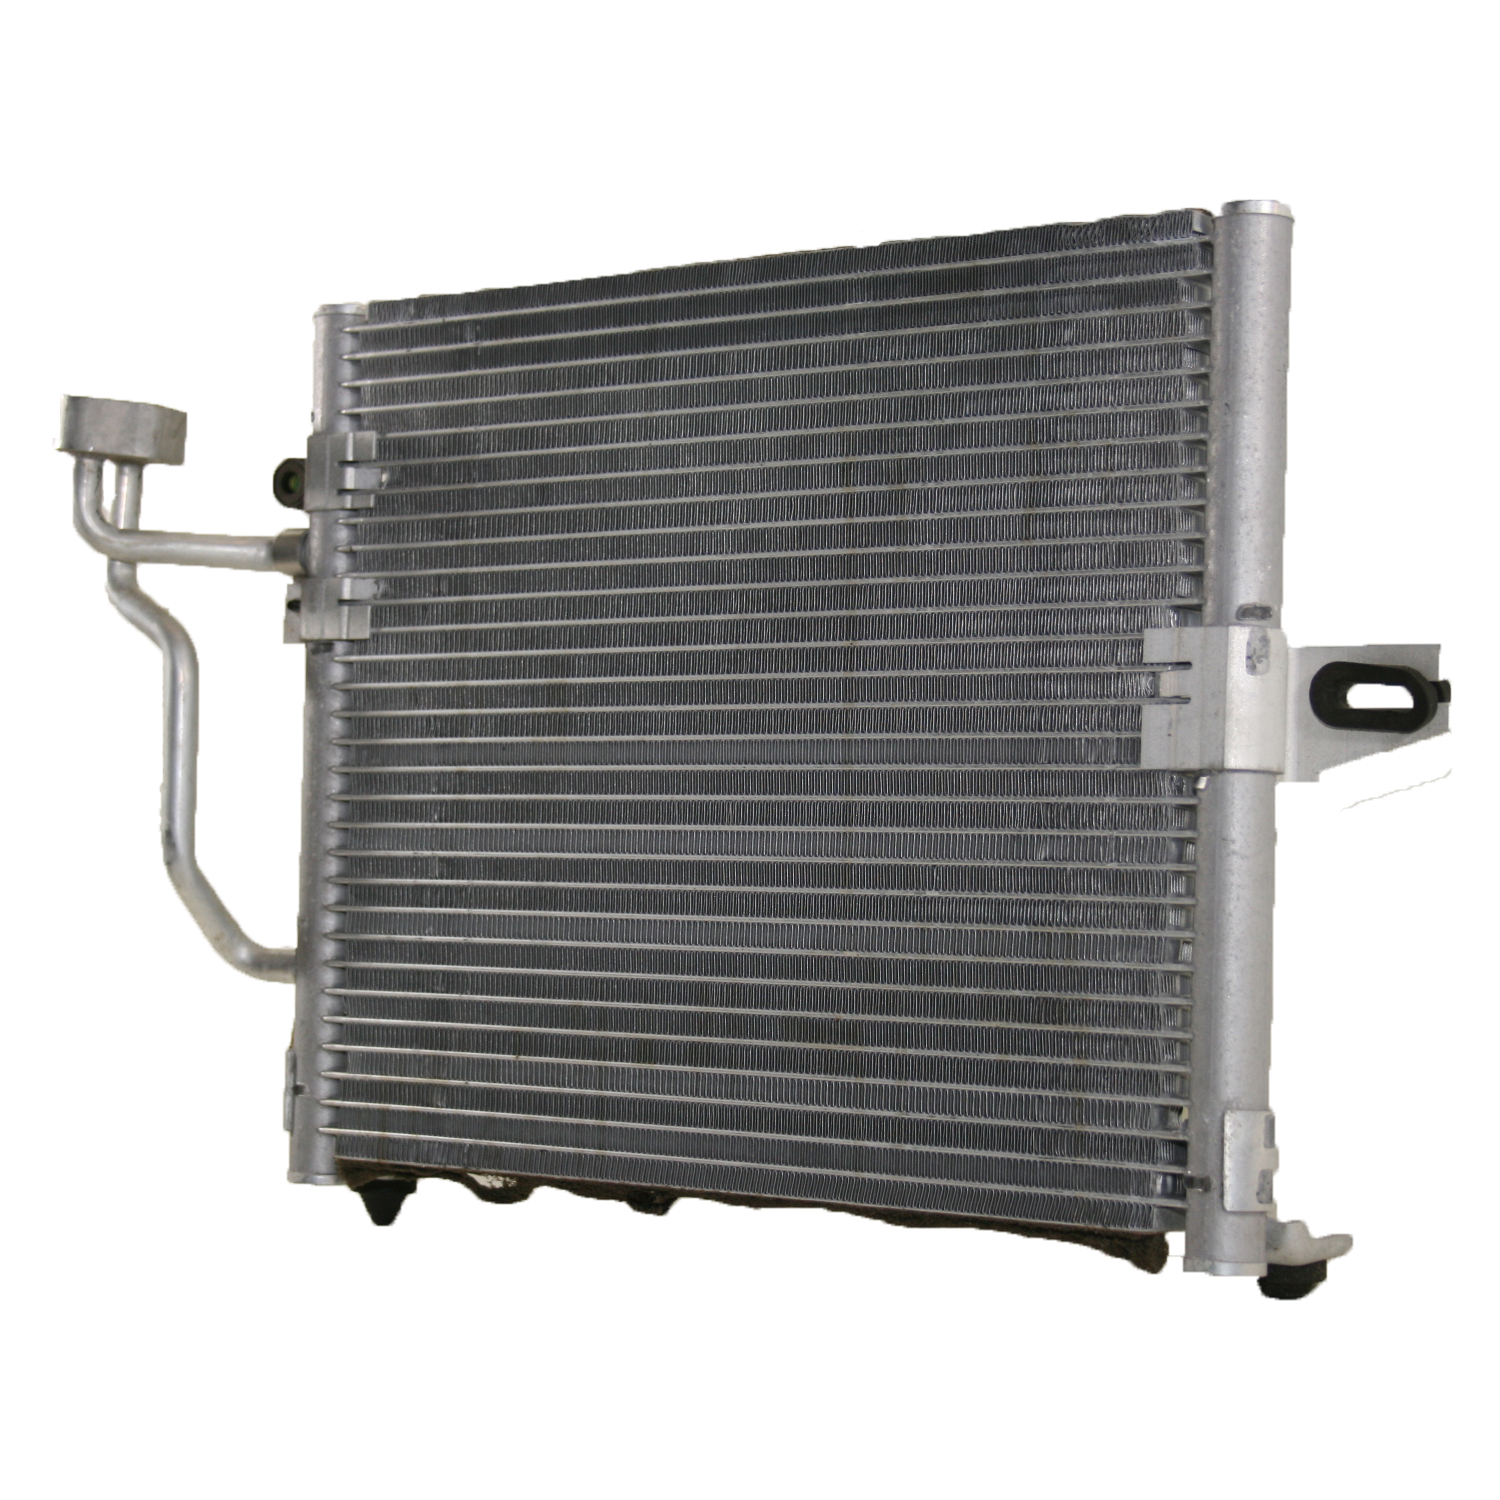 TCW Condenser 44-4511 New Product Image field_60b6a13a6e67c